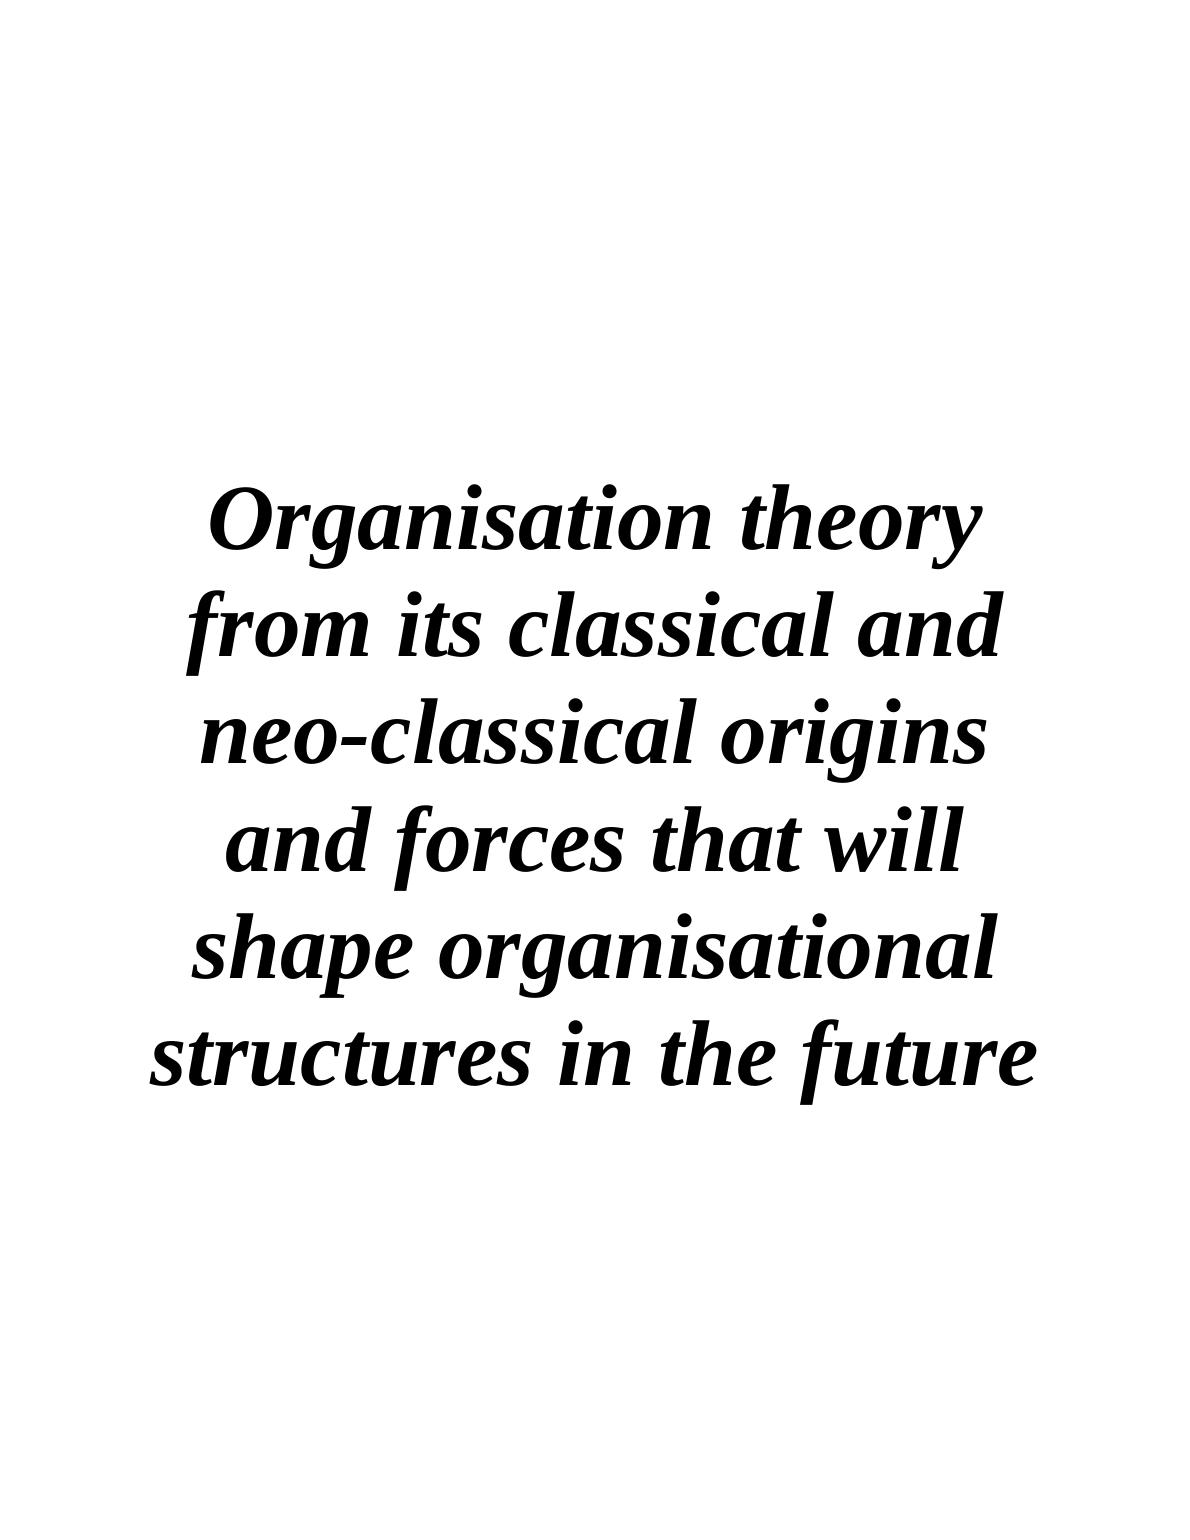 Organisation Theory: Classical and Neo-Classical Origins and Future Organisational Structures_1